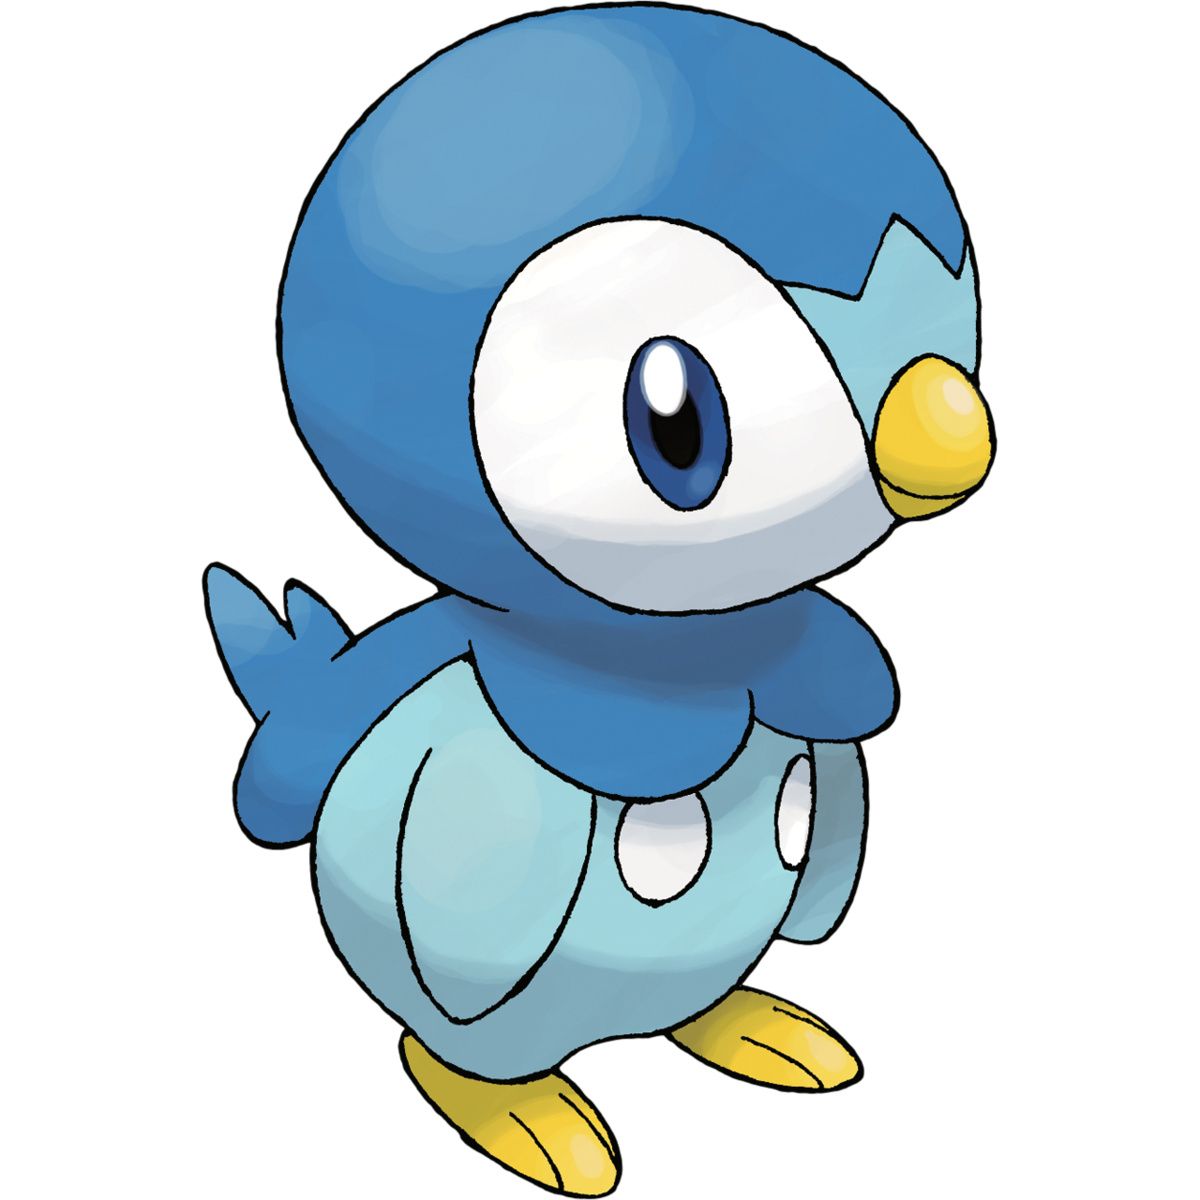 Piplup Pokemon PNG Transparent